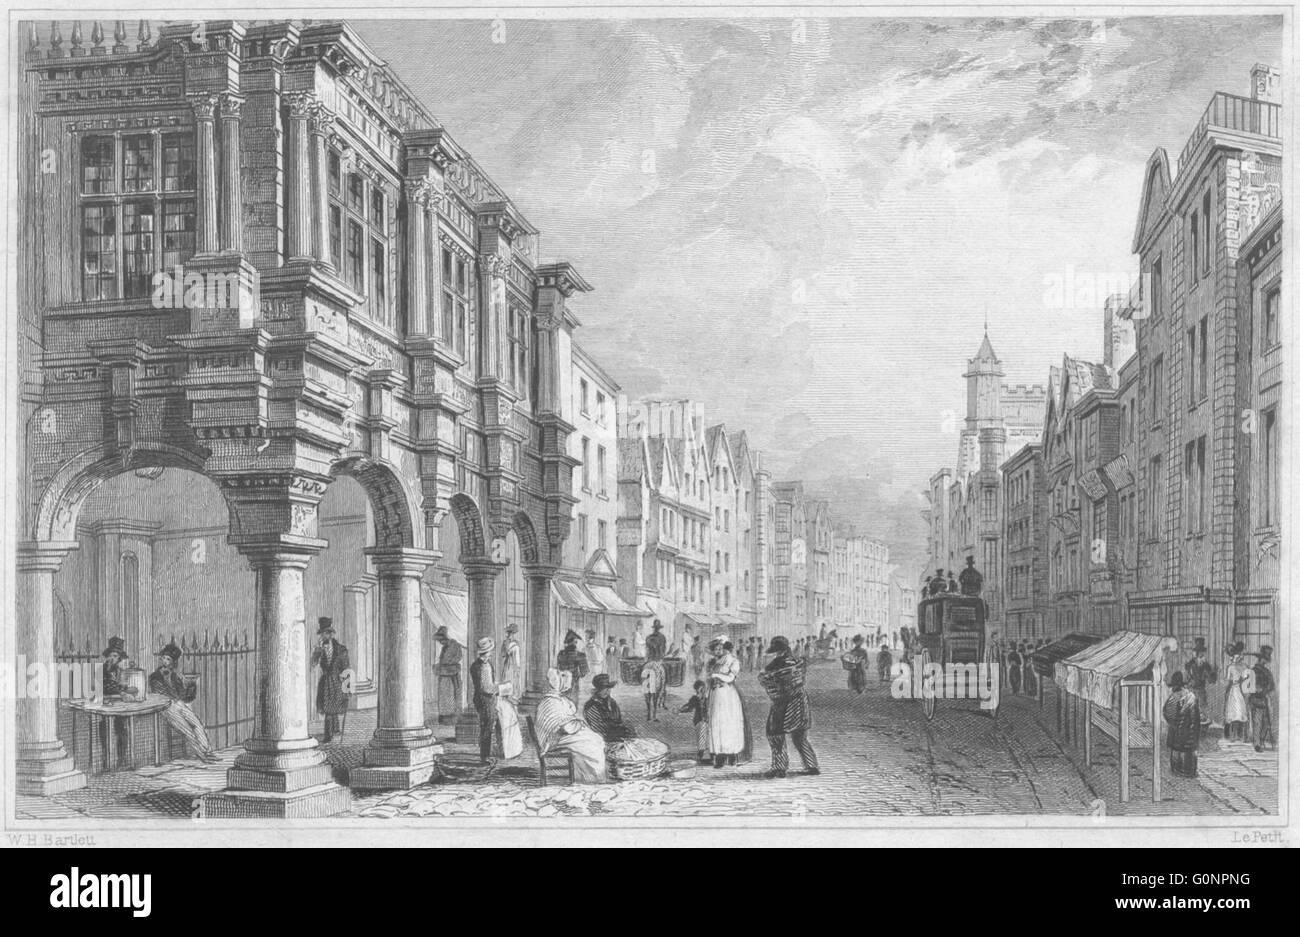 DEVON: Guildhall Fore Street, Exeter, antica stampa 1829 Foto Stock